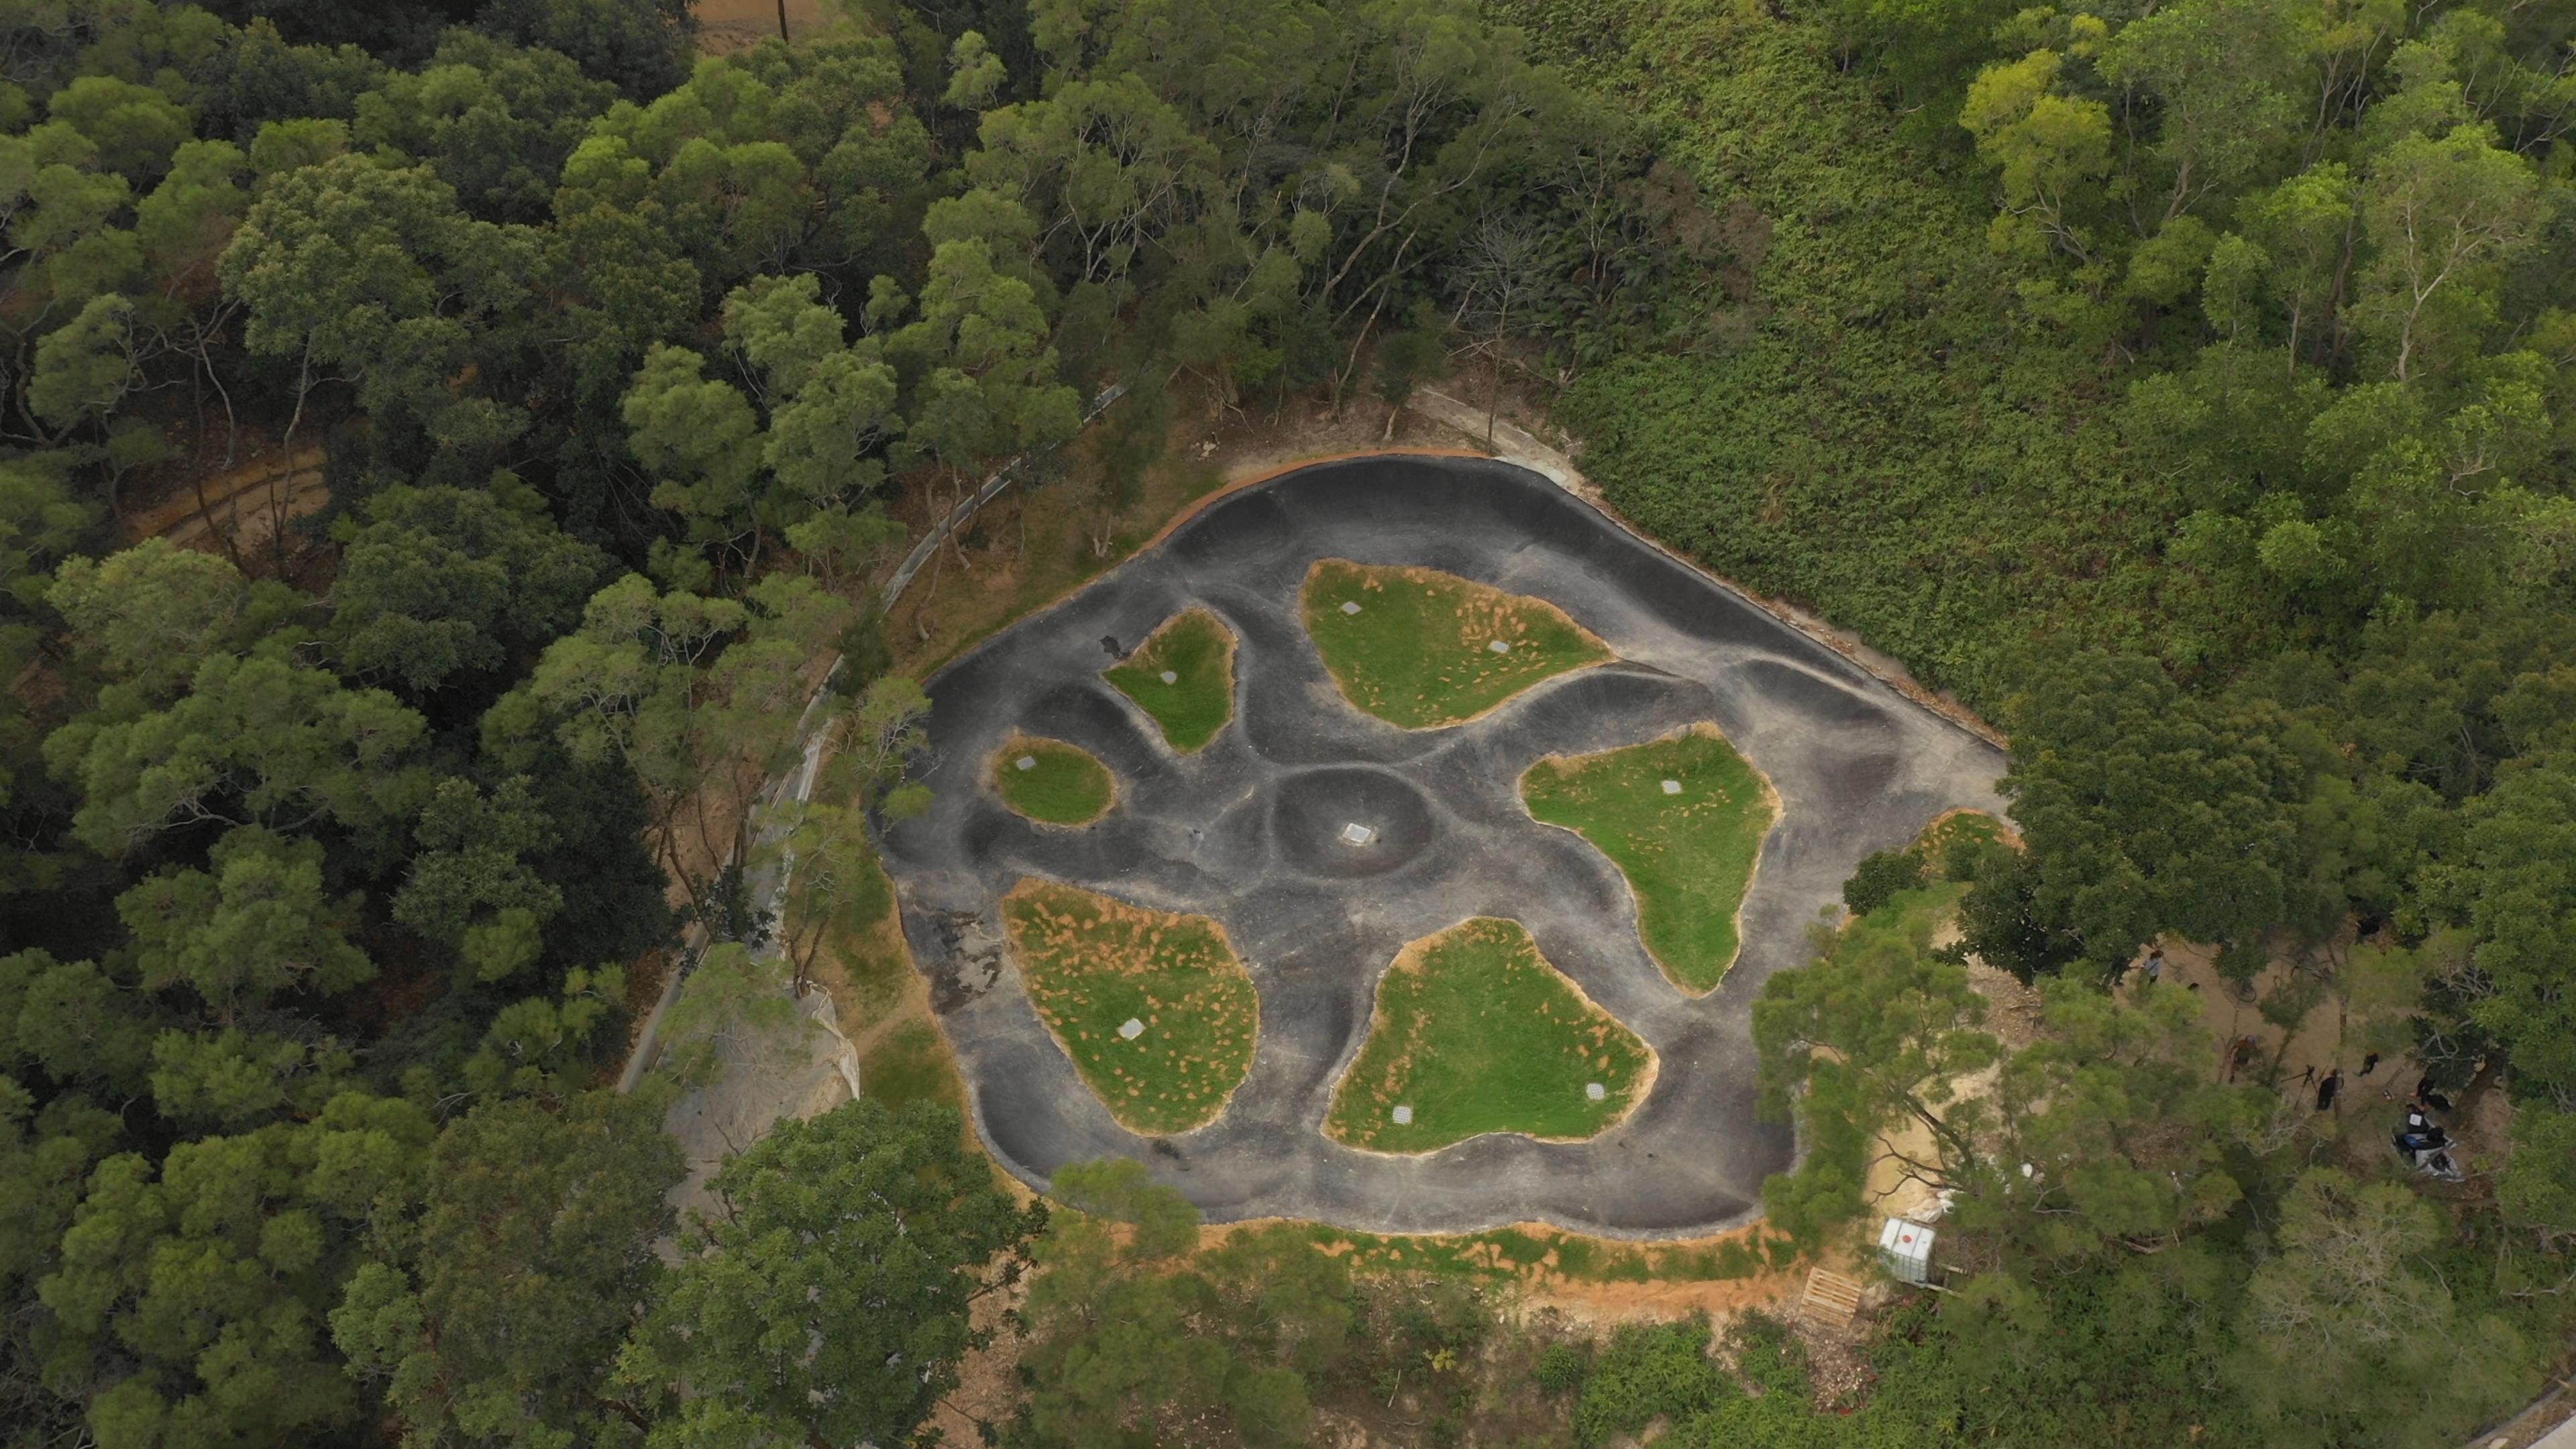 The Mui Wo Mountain Bike Practice Ground opens today (December 17). Photo shows a pump track in the practice ground.
